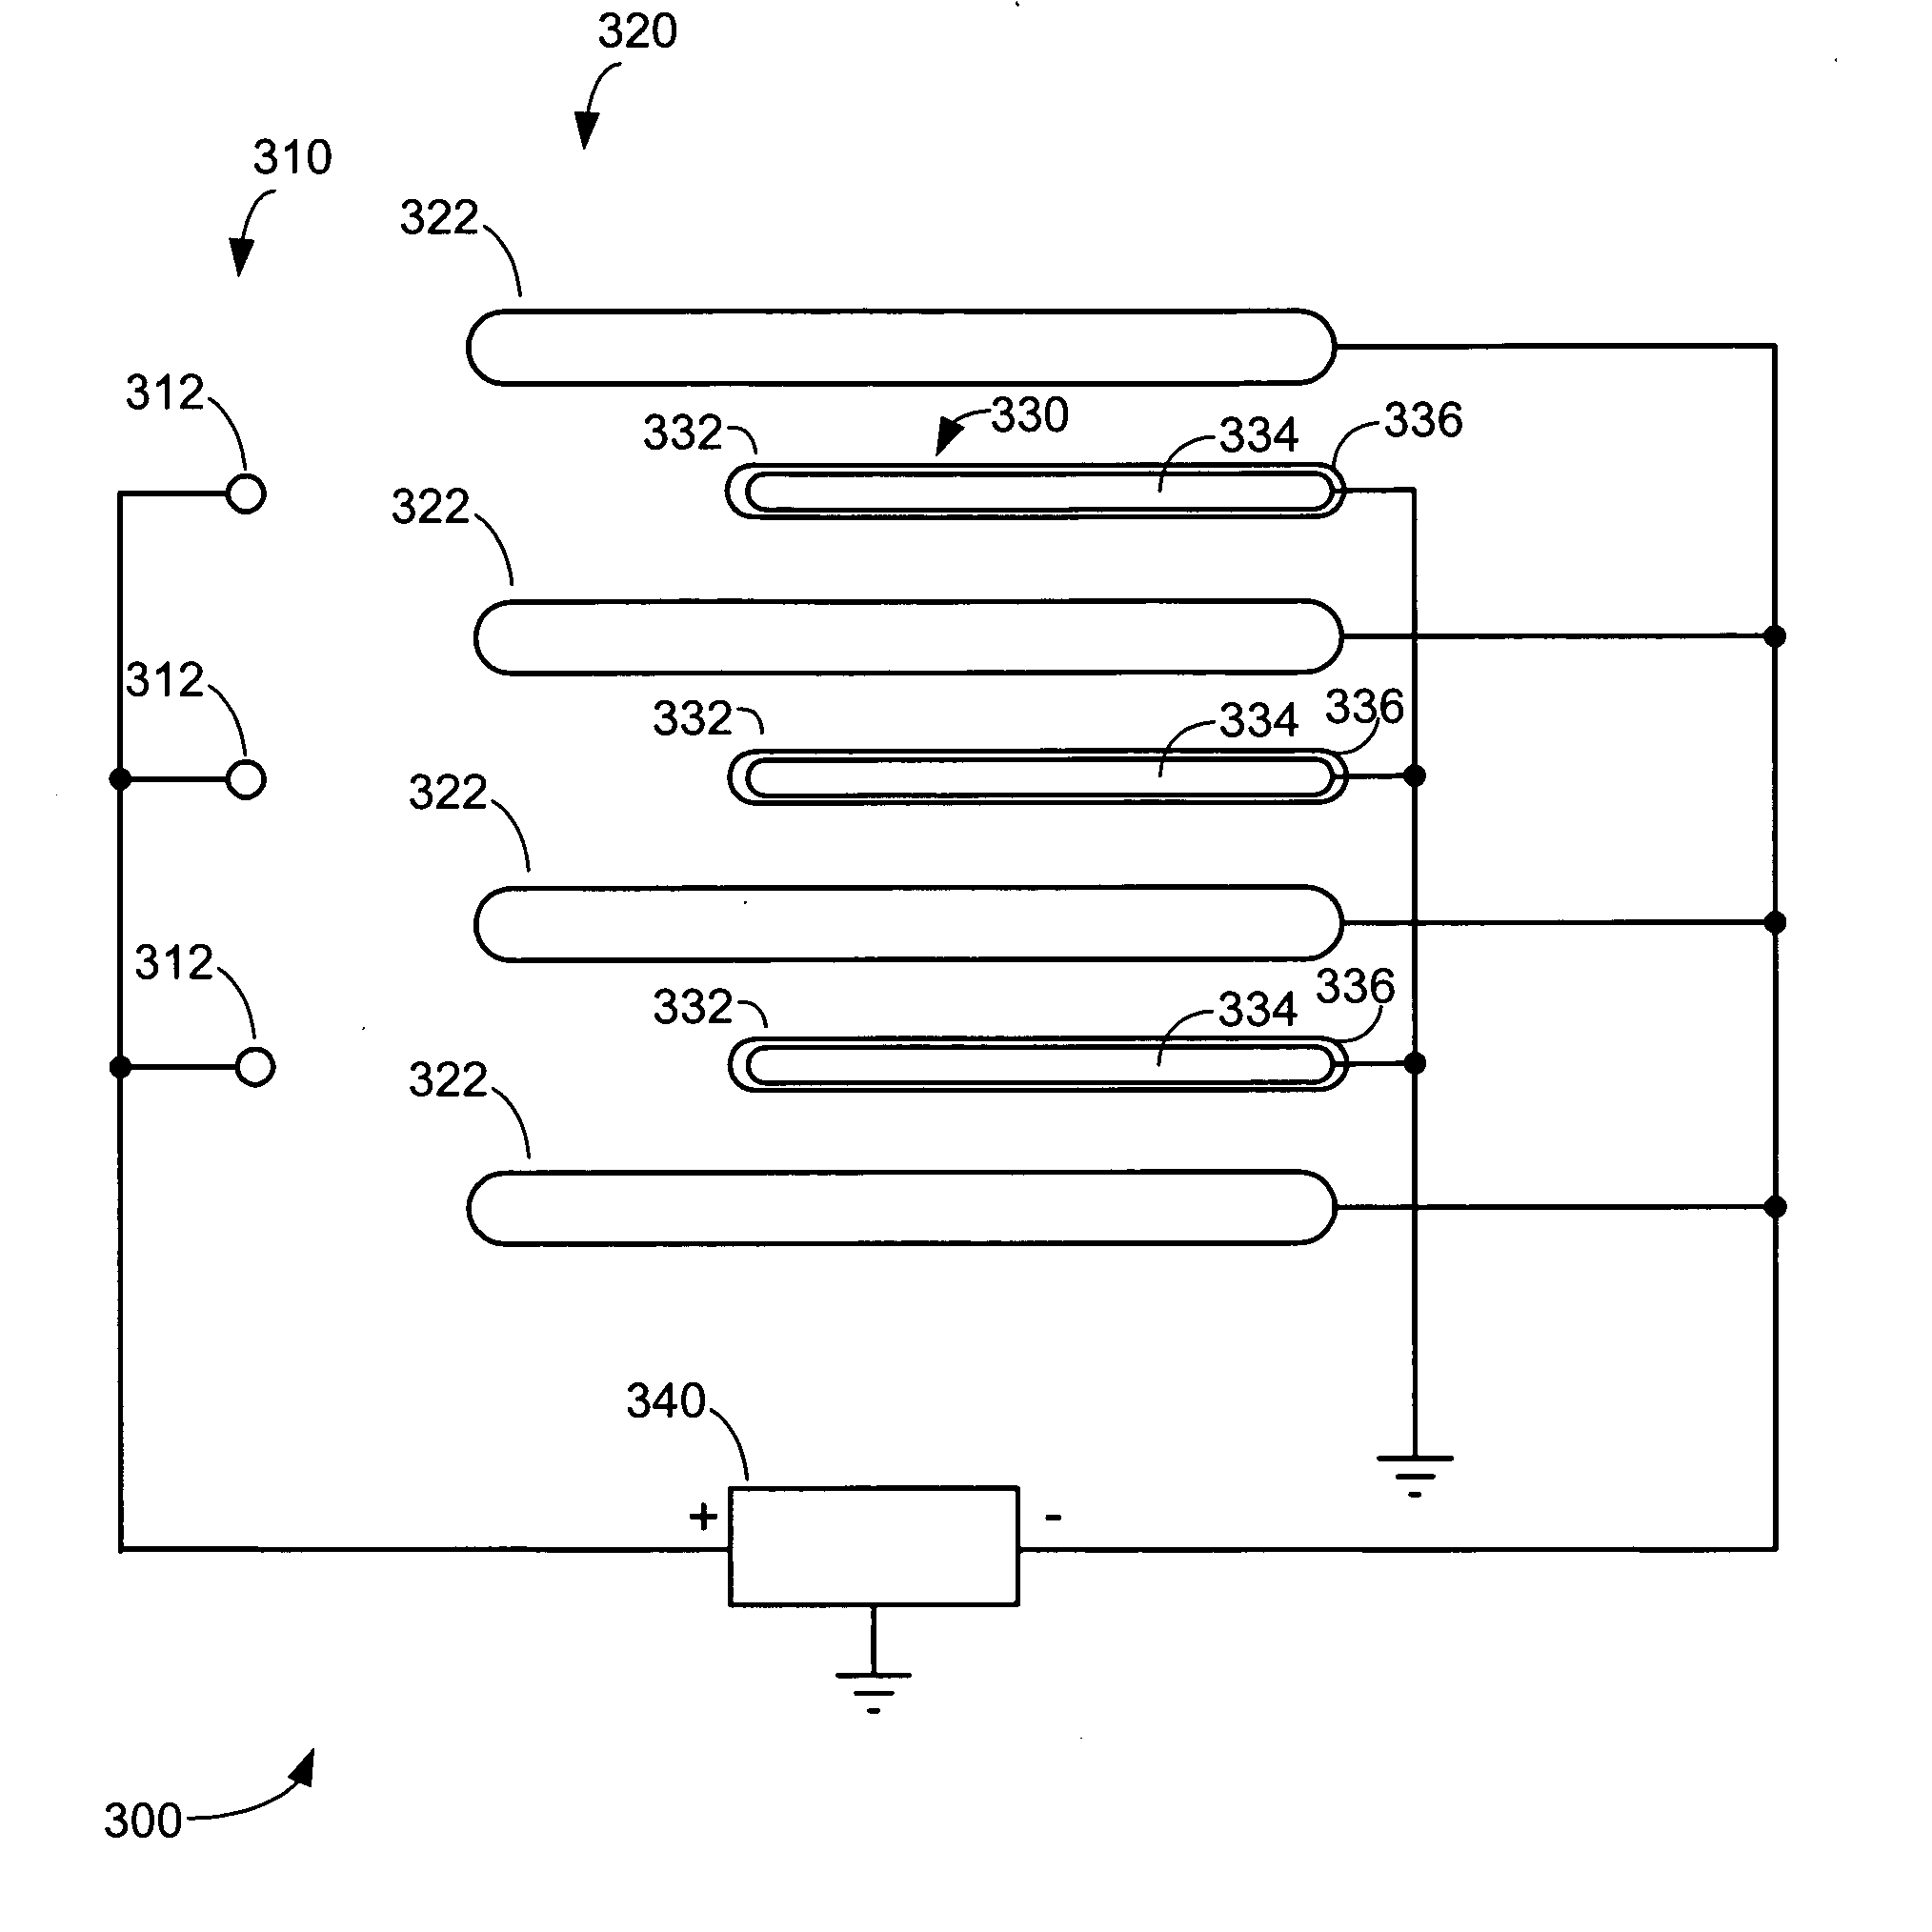 Electro-kinetic air transporter and conditioner devices with insulated driver electrodes